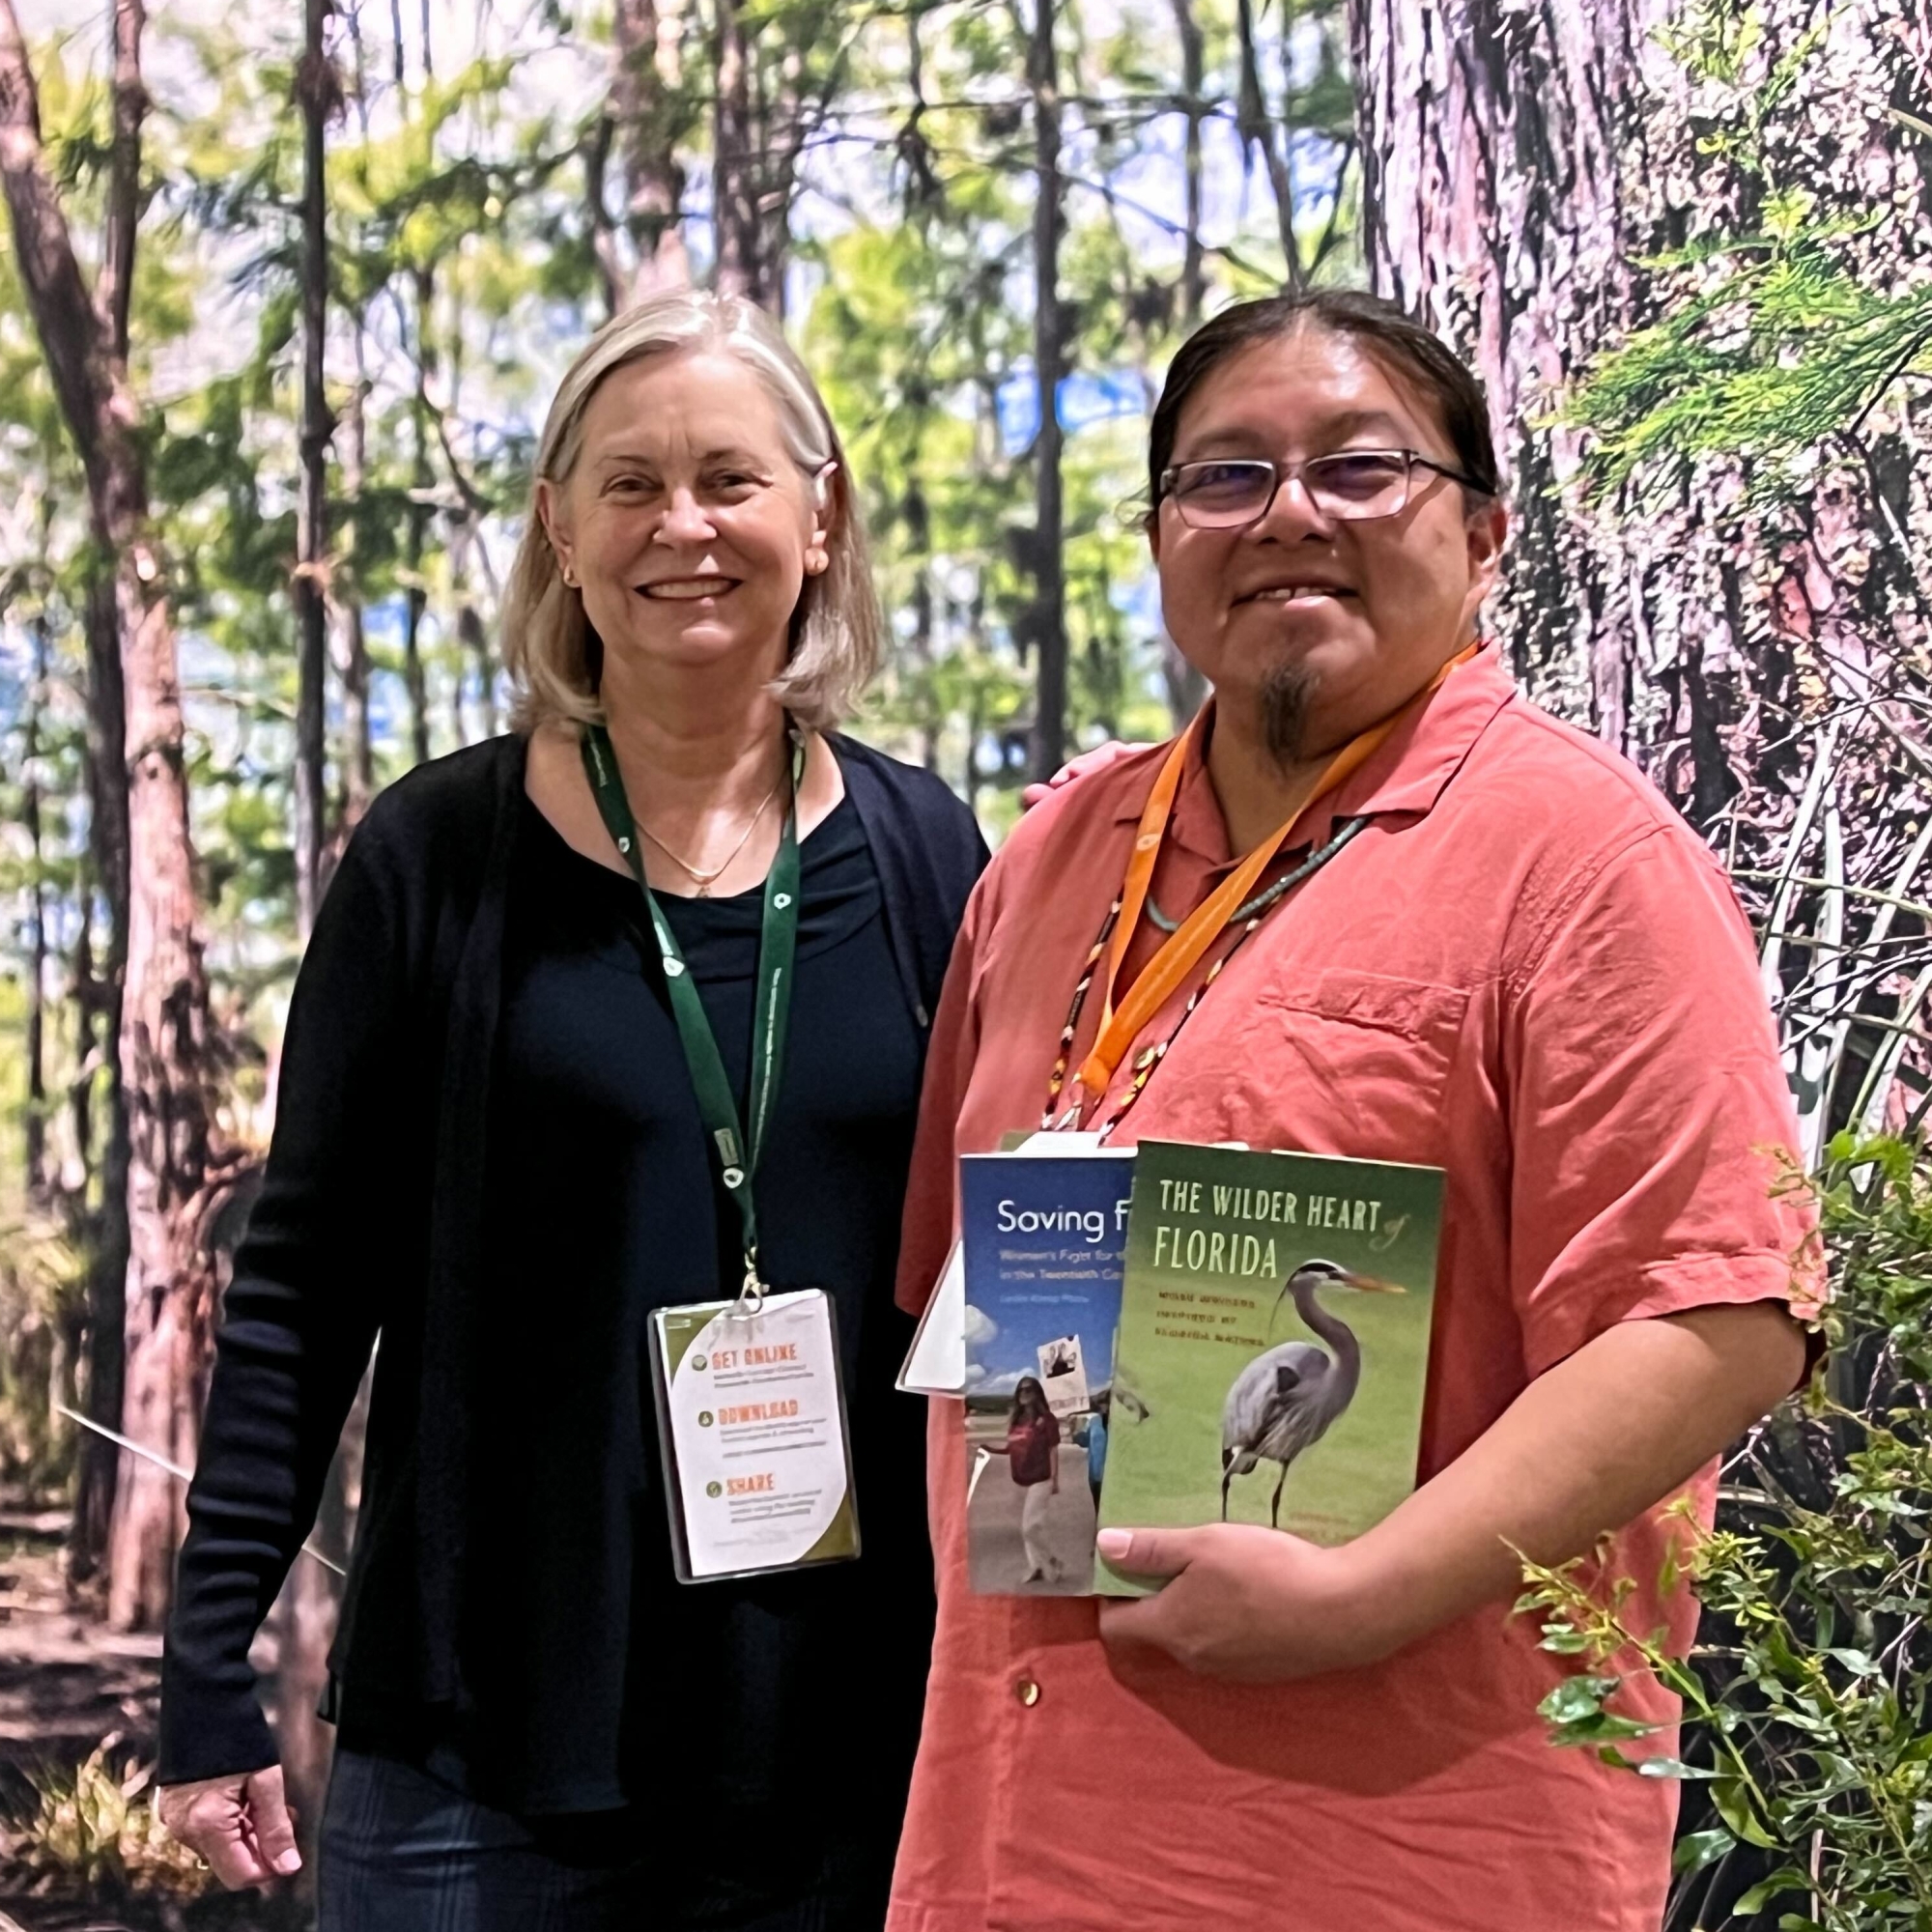 Leslie K. Poole, coeditor of The Wilder Heart of Florida: More Writers Inspired by Florida Nature, and Reverend Houston Cypress at the Florida Wildlife Corridor Summit